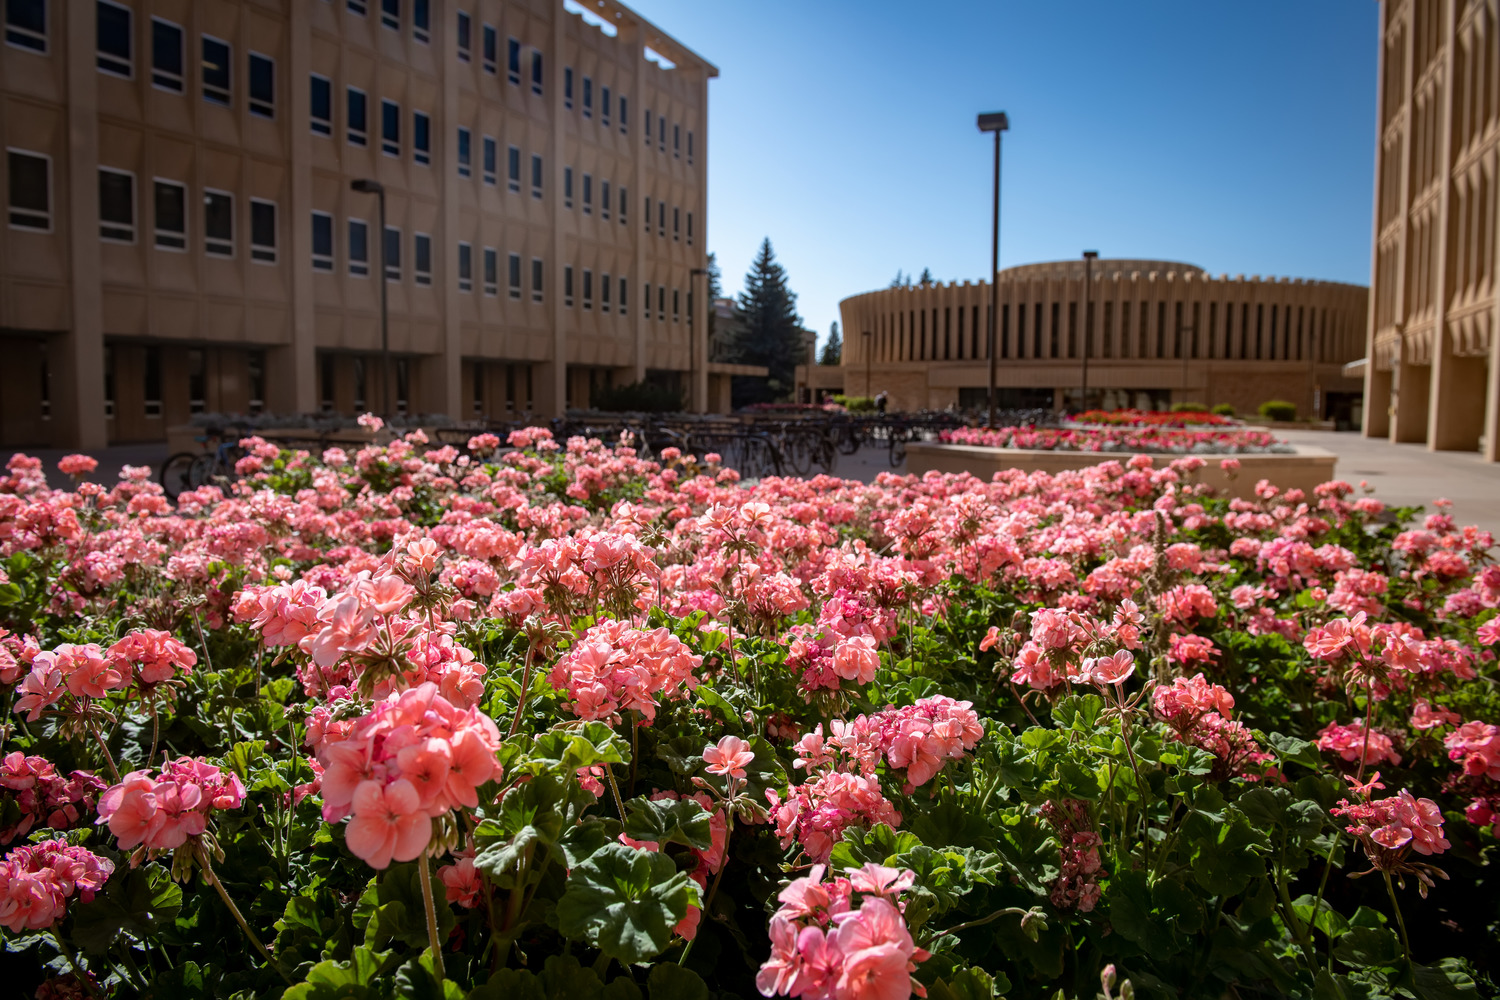 Photo of pink flowers with Classroom Building in background